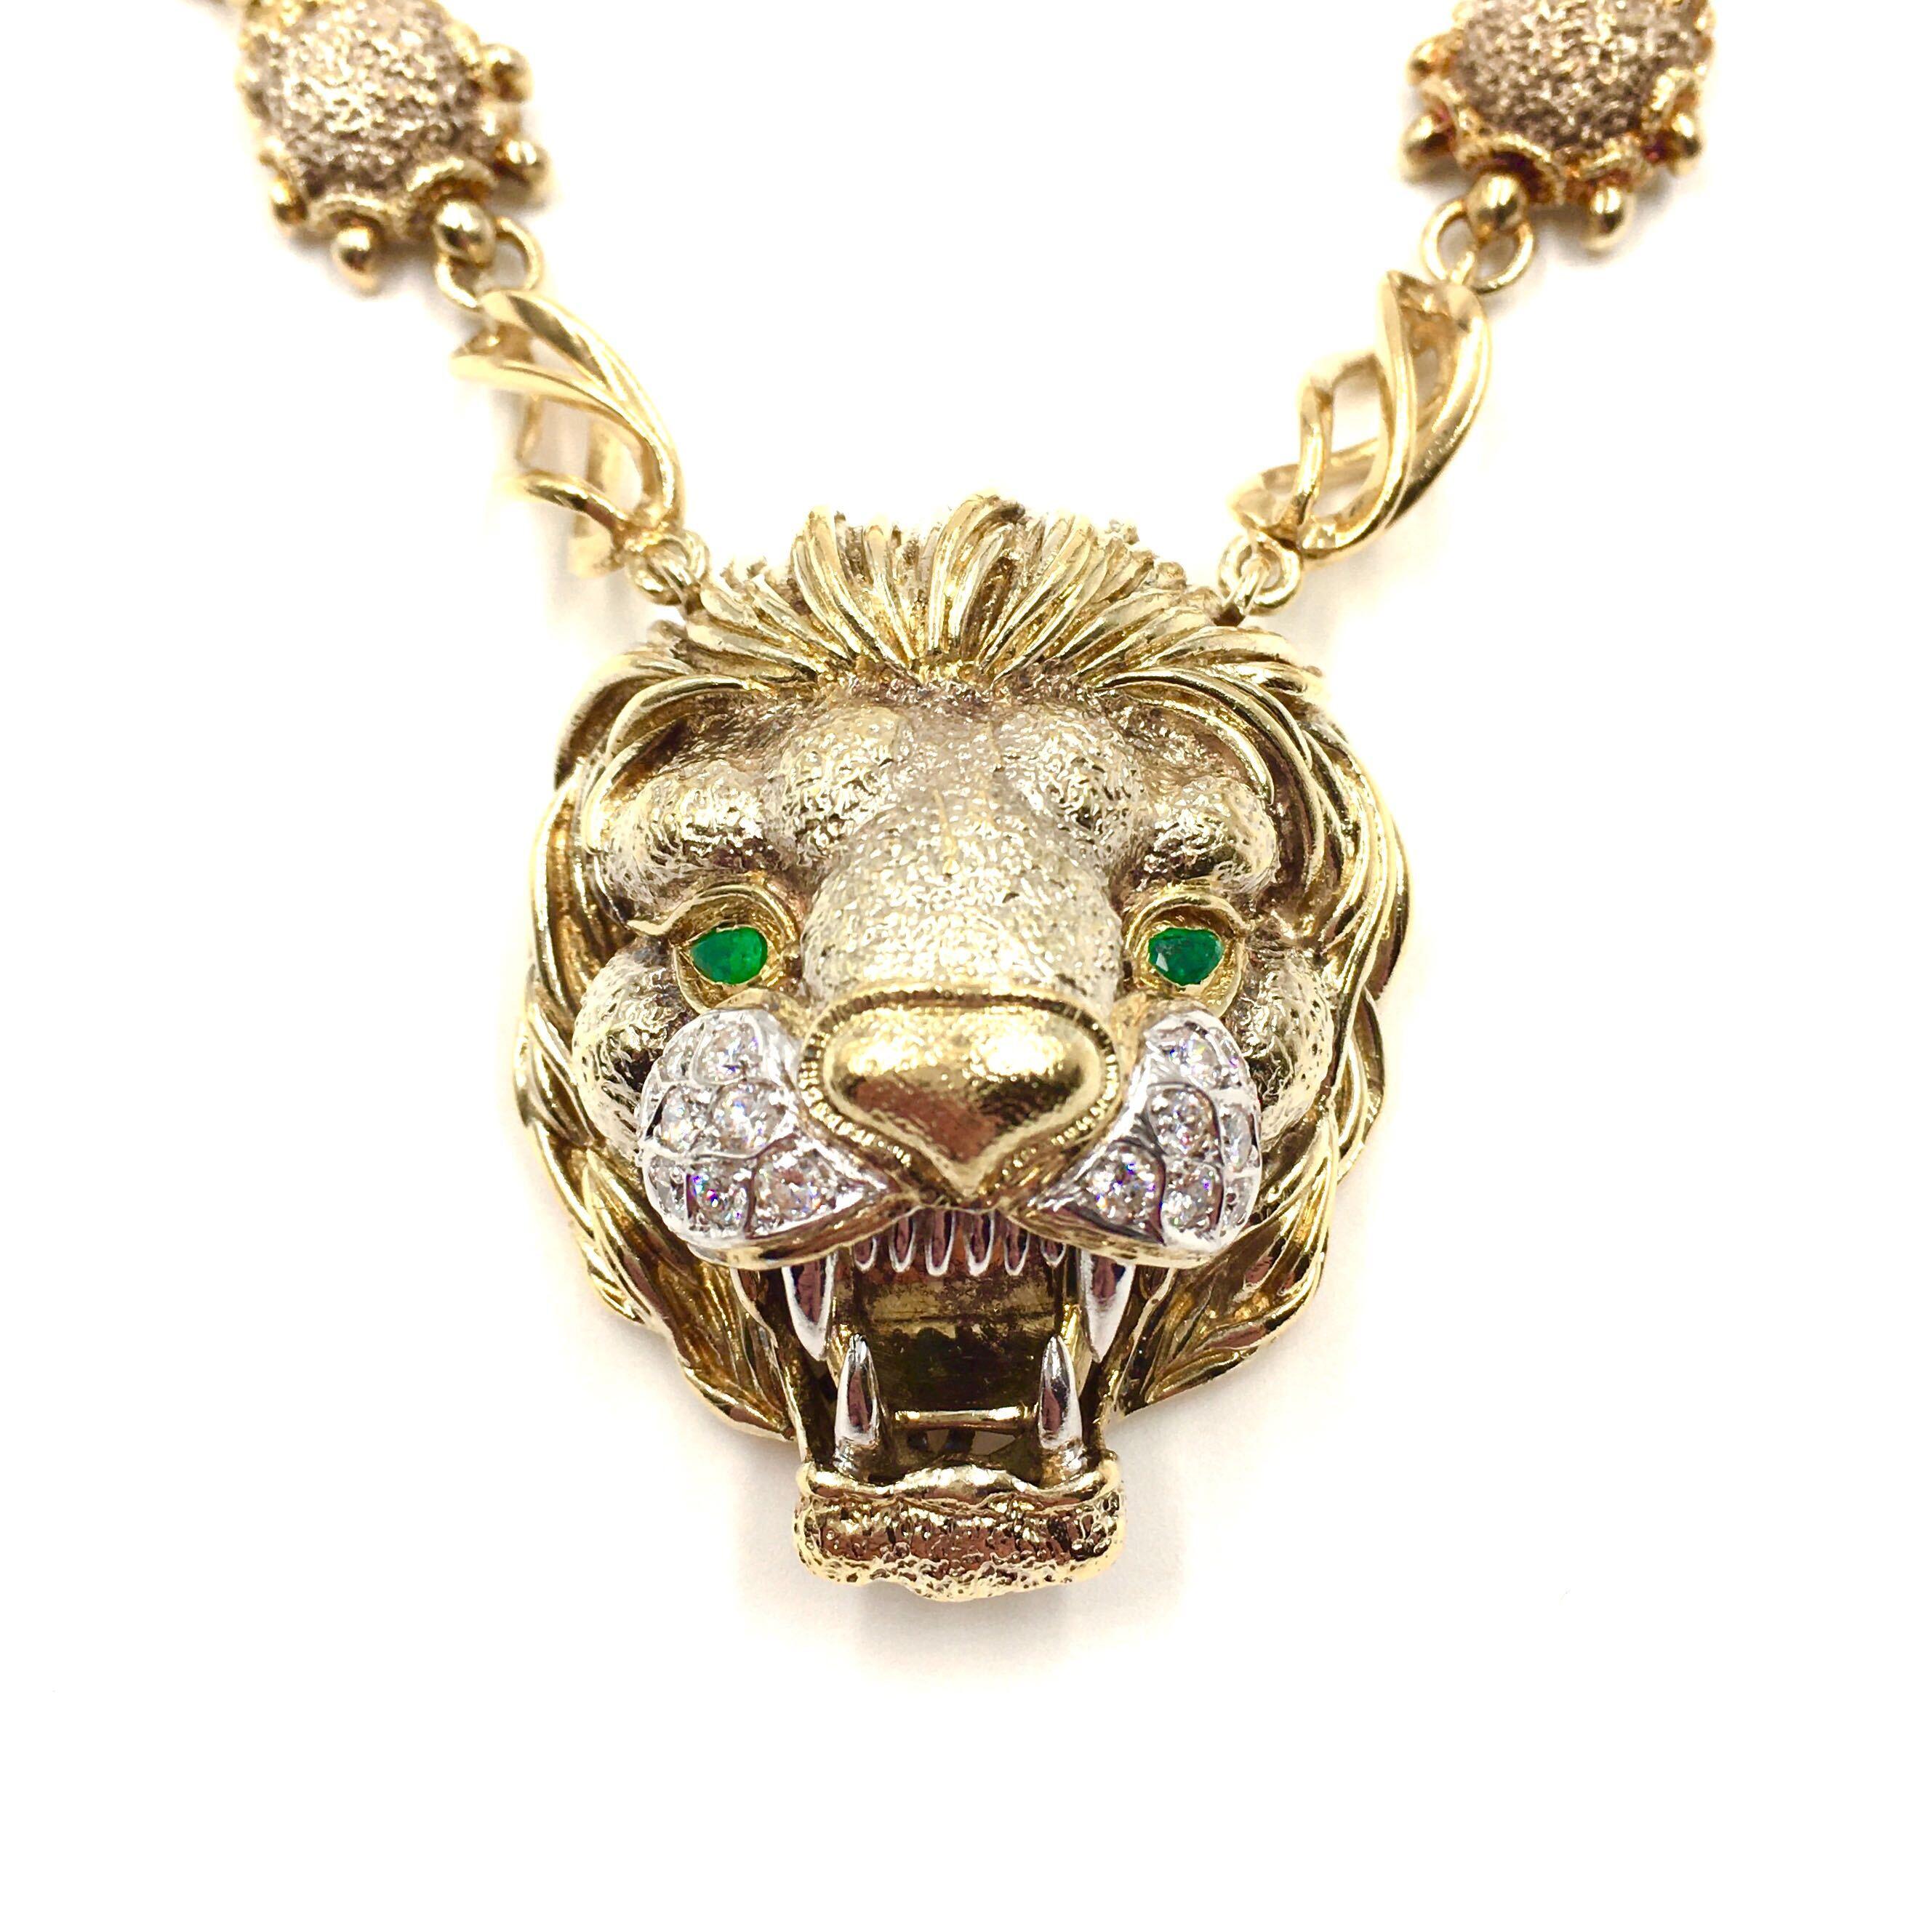 An 18 karat yellow gold, diamond and emerald necklace and pendant, Frascarolo, Italy. The long chain formed of textured lion’s paw links alternating with open spiral links centering a bold pendant of a three dimensional lion’s head, the whiskers set